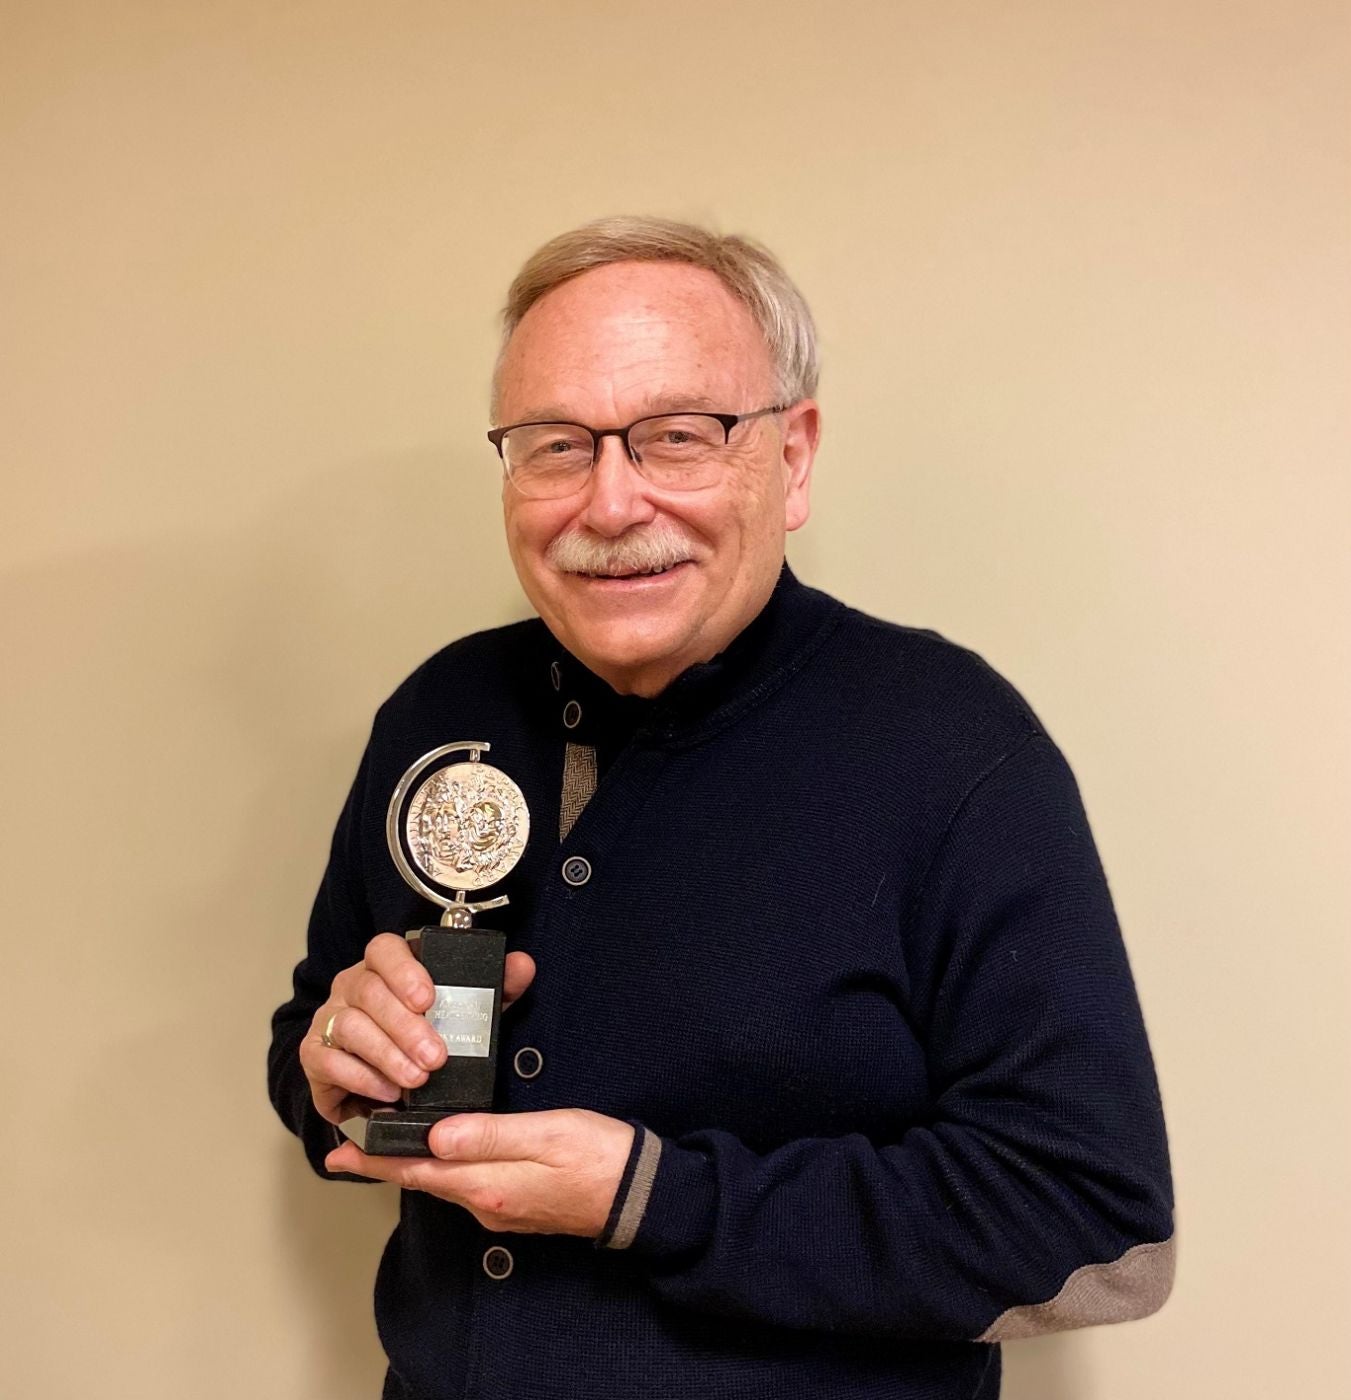 A photo of PPAC President and CEO holding the Tony Award 